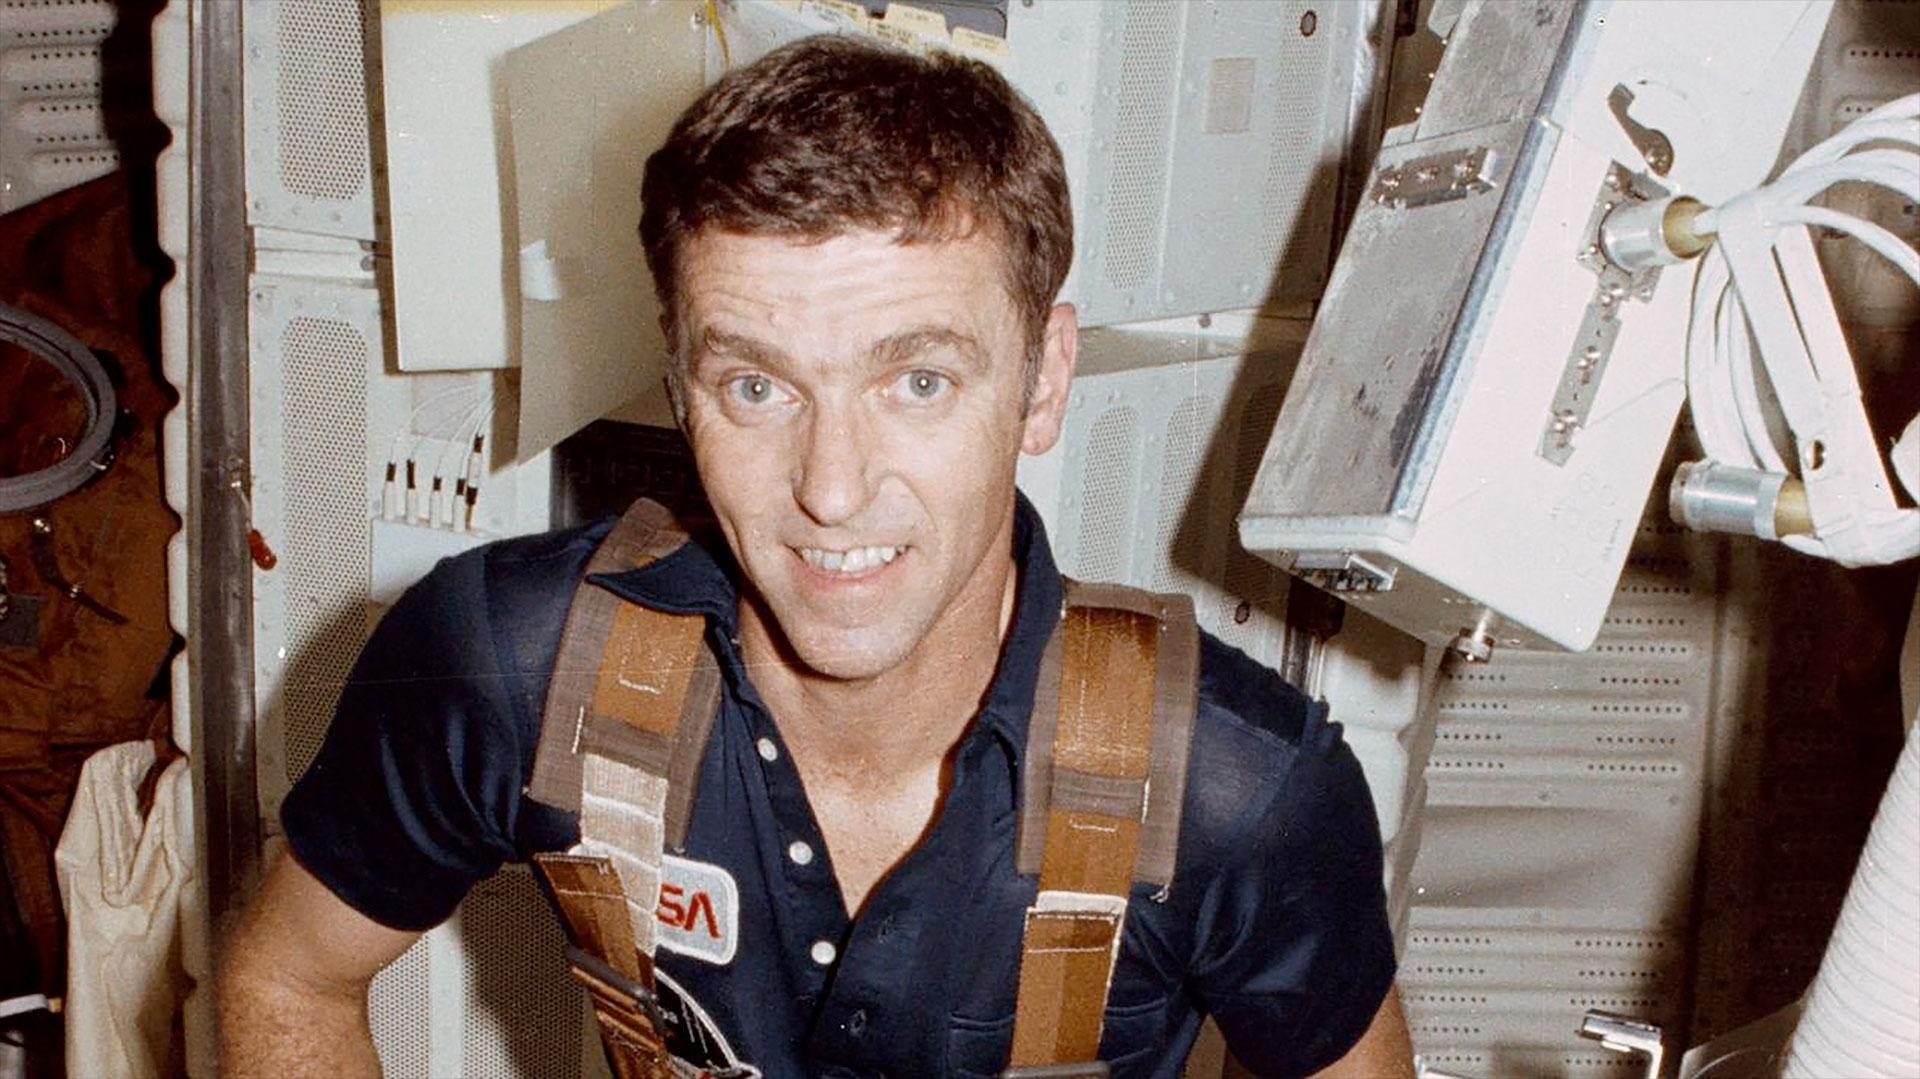  Joe Engle, X-15 rocket plane and space shuttle astronaut, dies at 91 